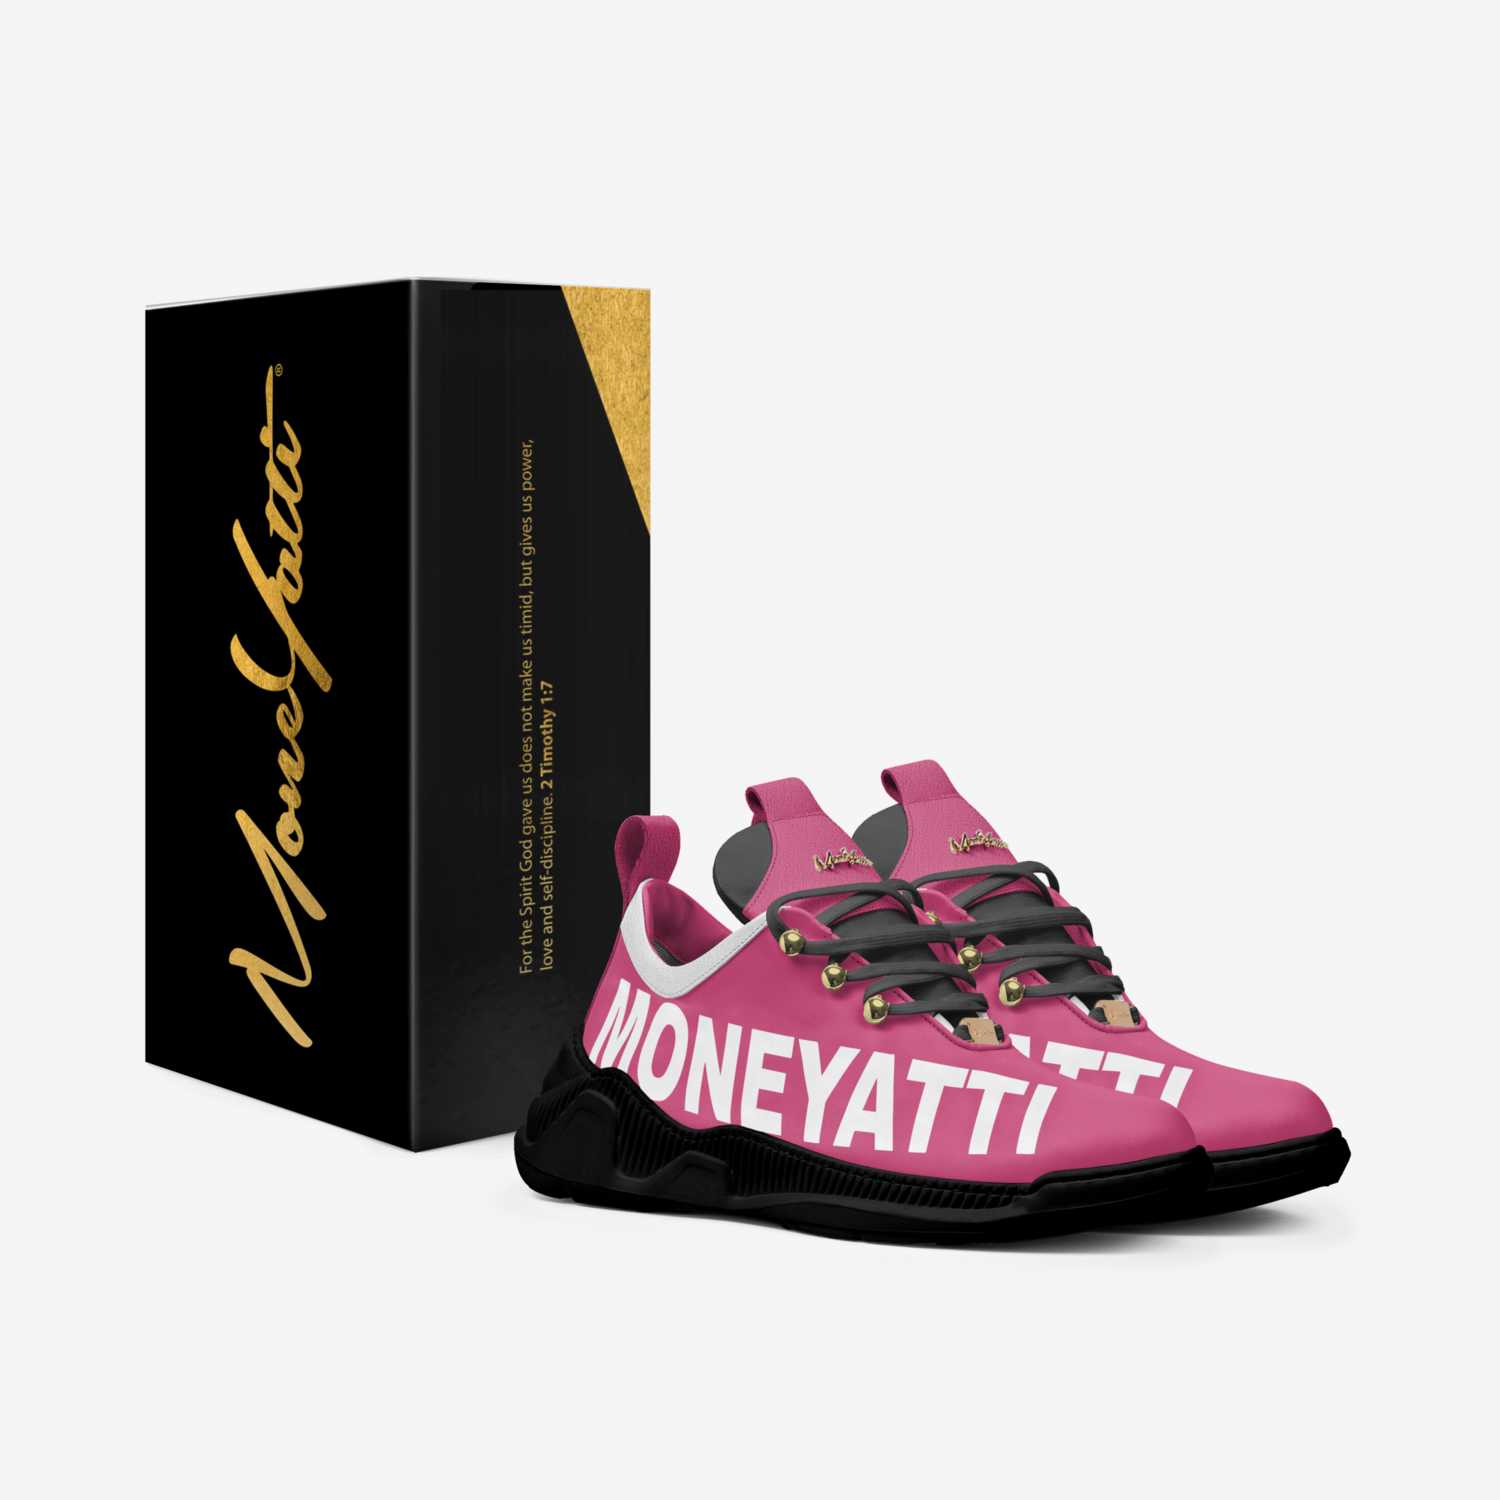 Sig29 custom made in Italy shoes by Moneyatti Brand | Box view